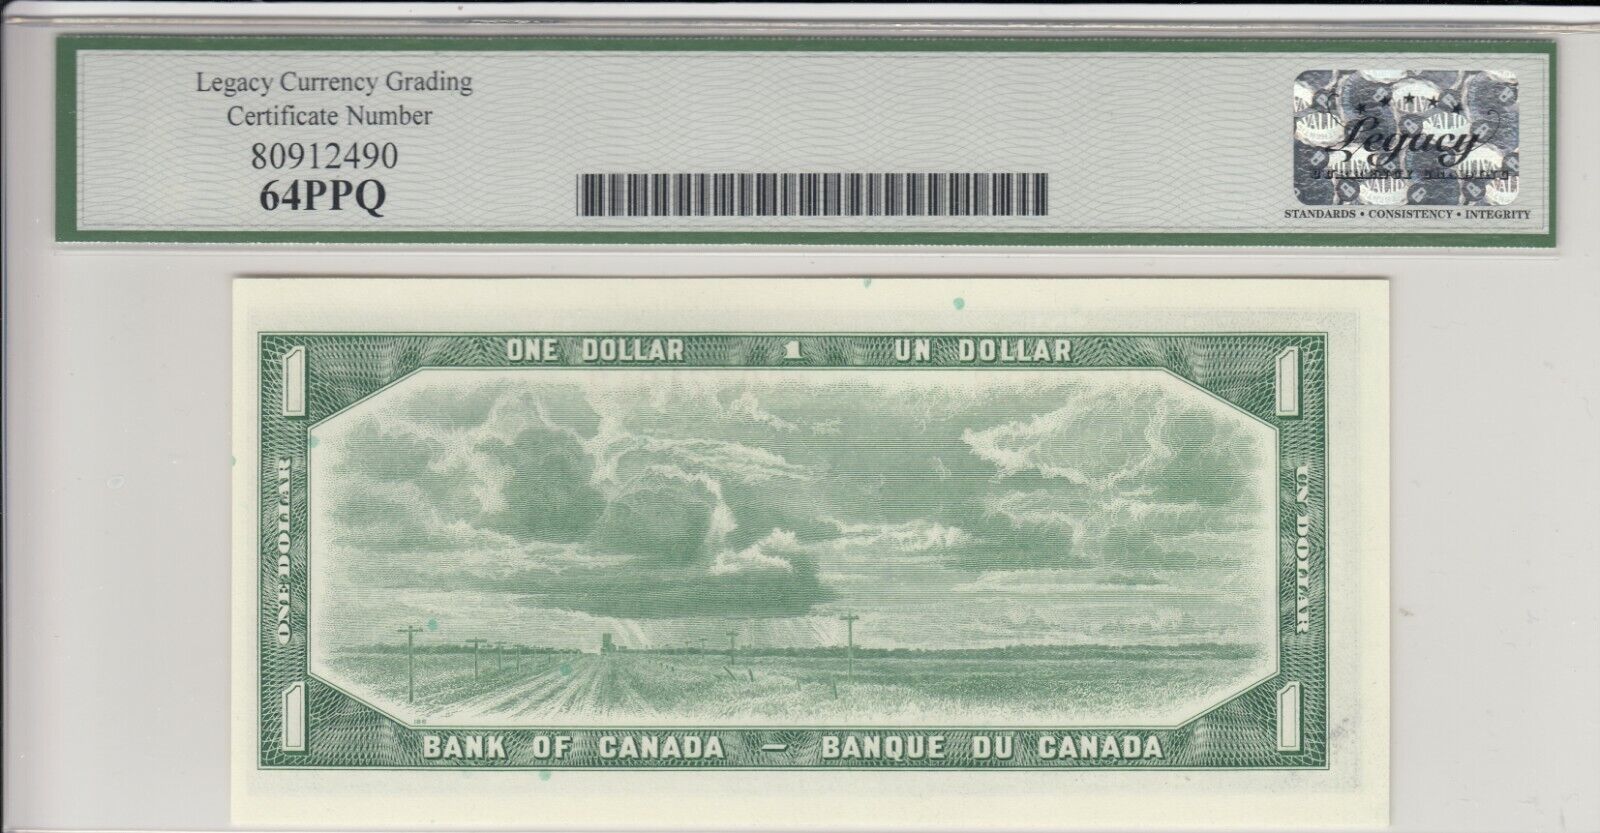 1954 Bank of Canada $1 Replacement Note - Legacy Choice New 64PPQ - Cat#37cA